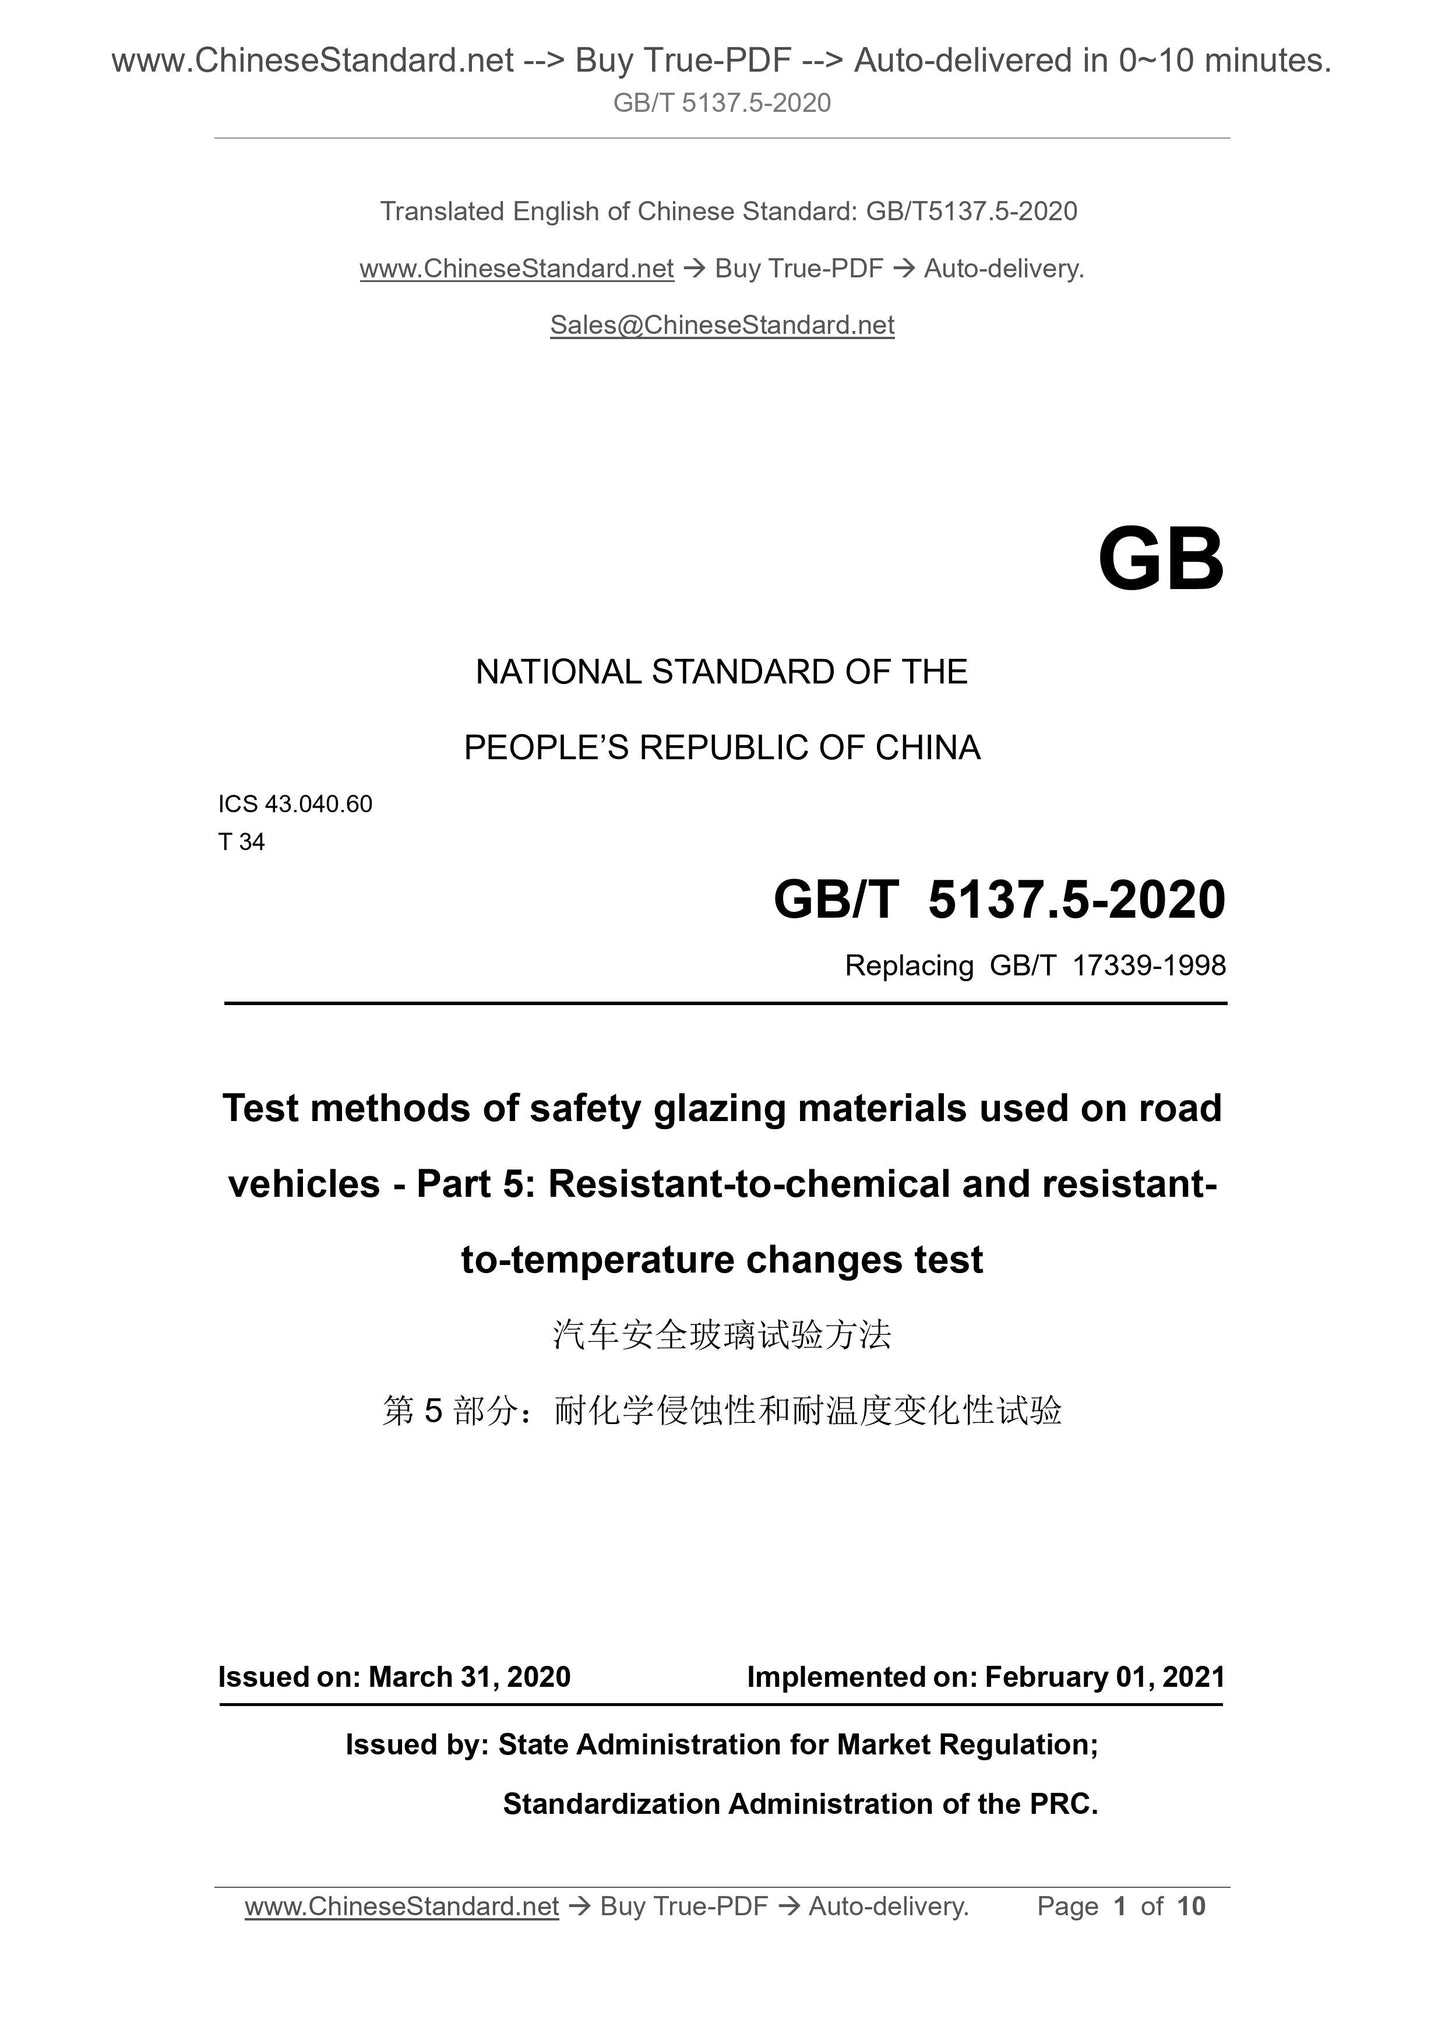 GB/T 5137.5-2020 Page 1